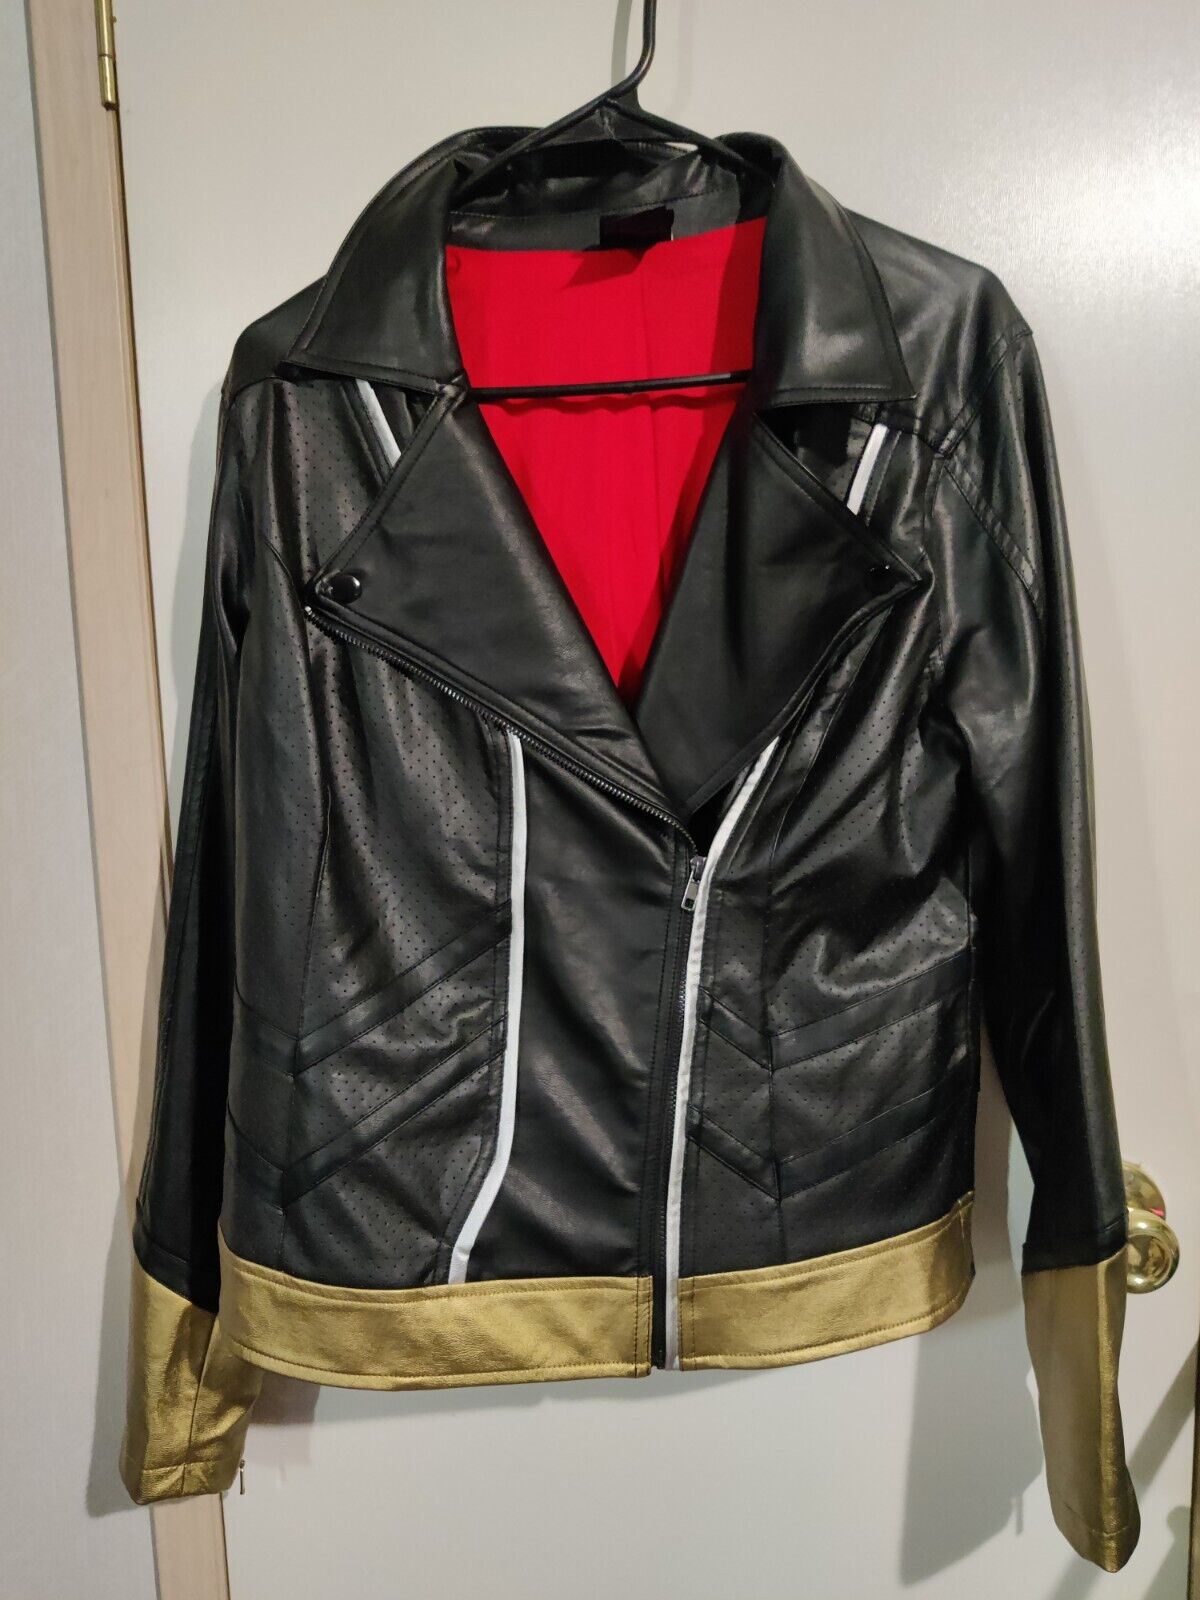 Her Universe - Black Widow Marvel faux leather moto jacket top cosplay official